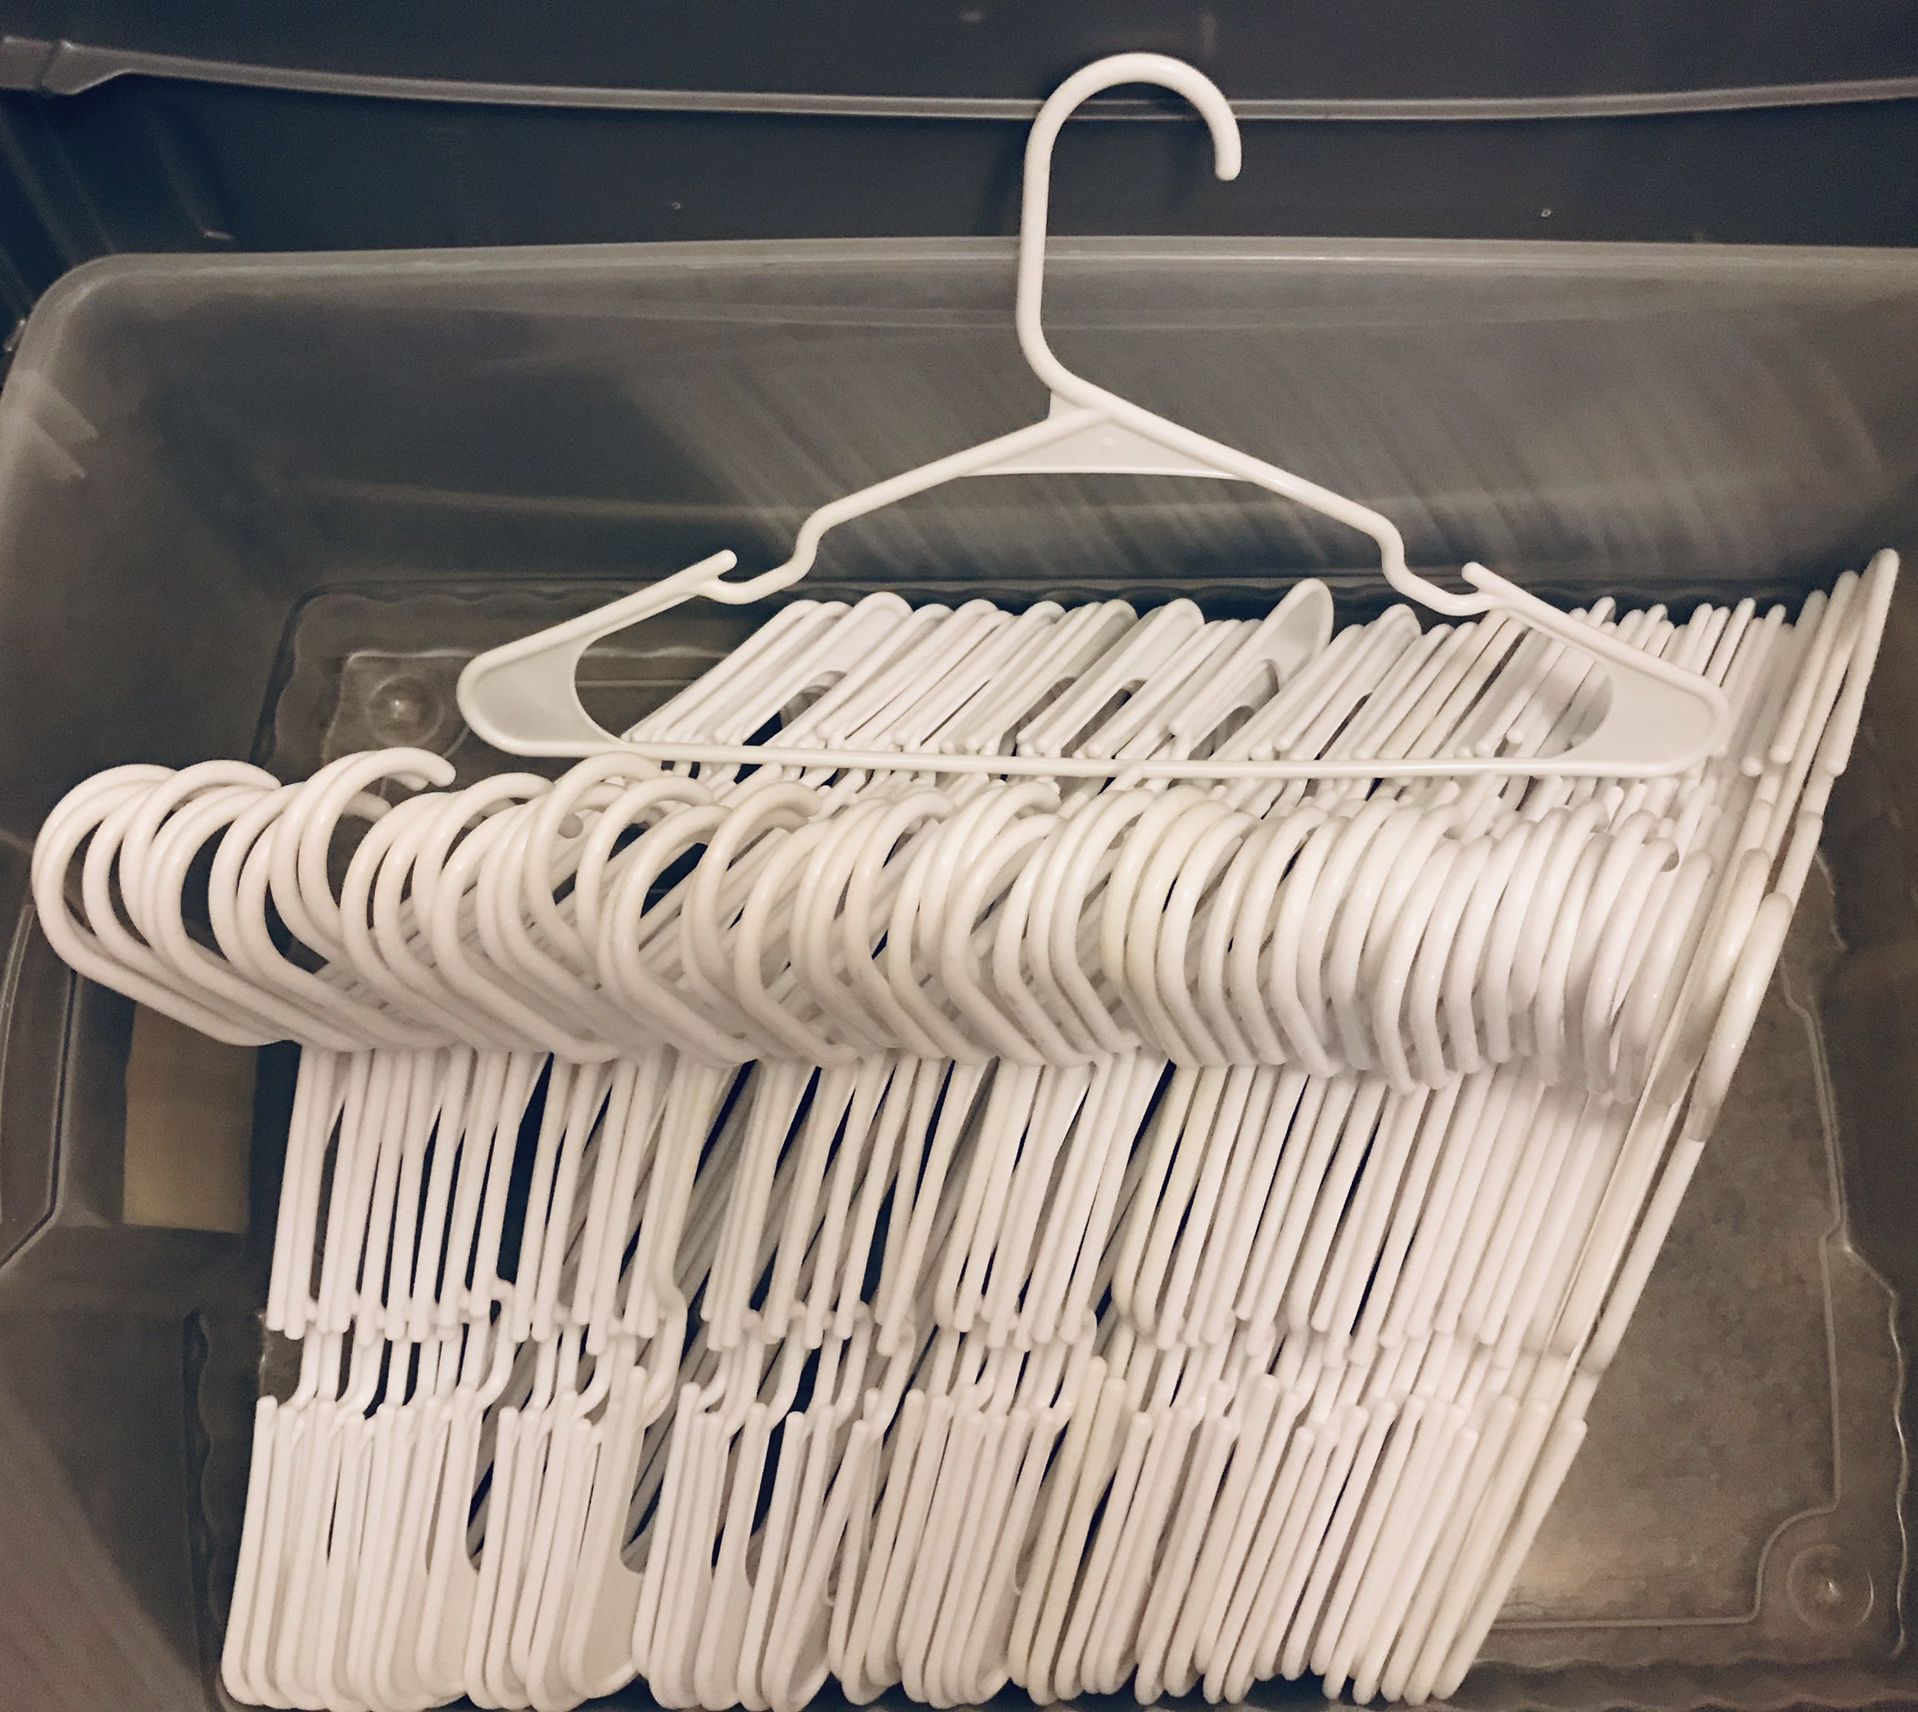 LOT OF WHITE CLOTHES HANGERS (54 count)